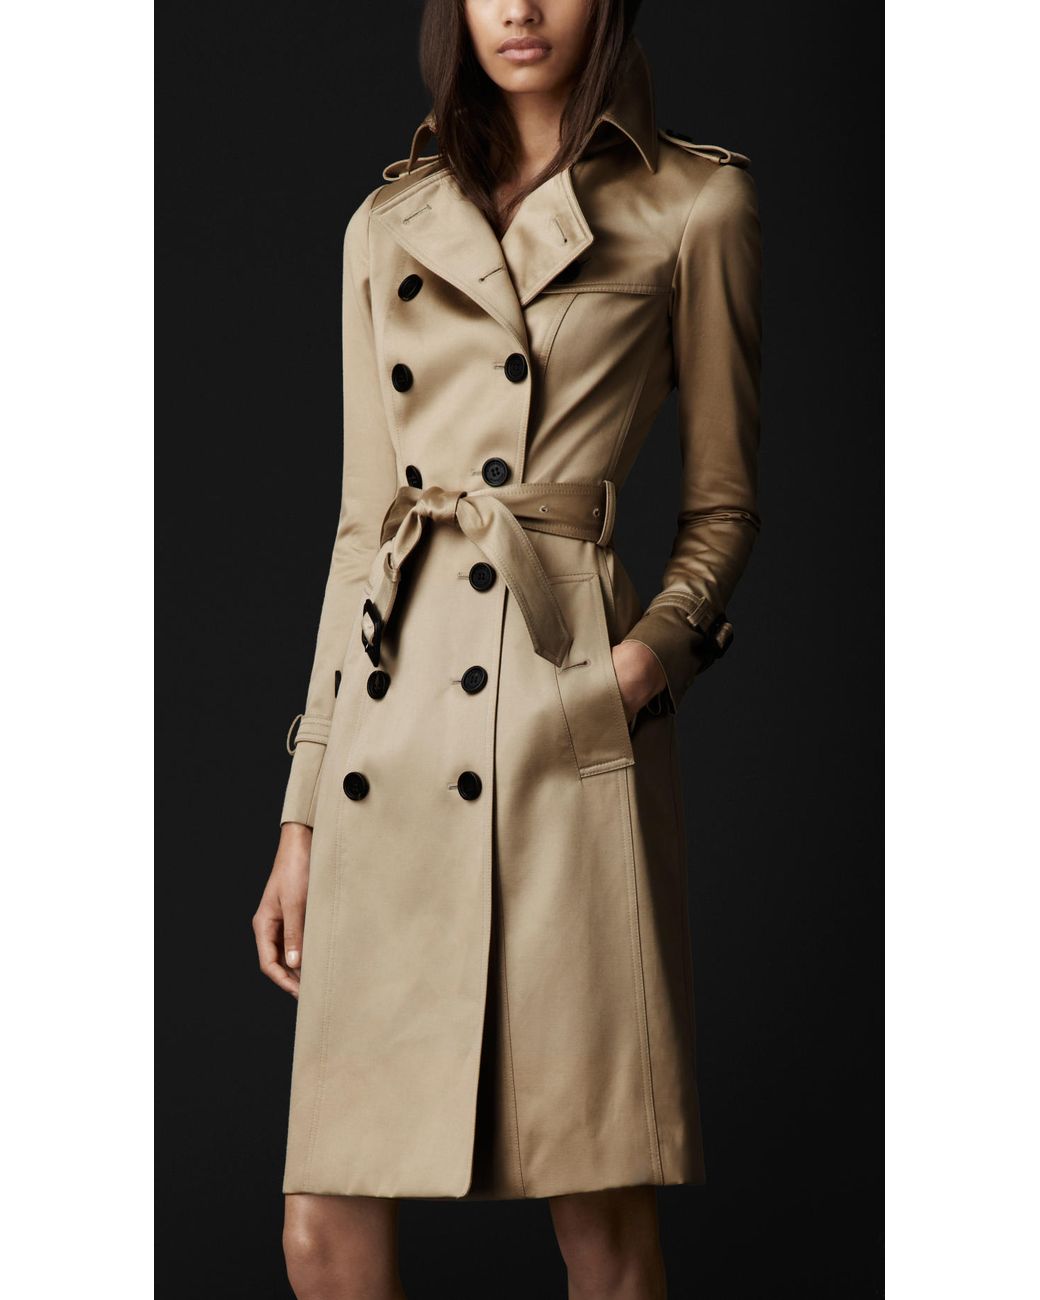 Burberry Prorsum Long Cotton Sateen Trench Coat in Natural | Lyst UK